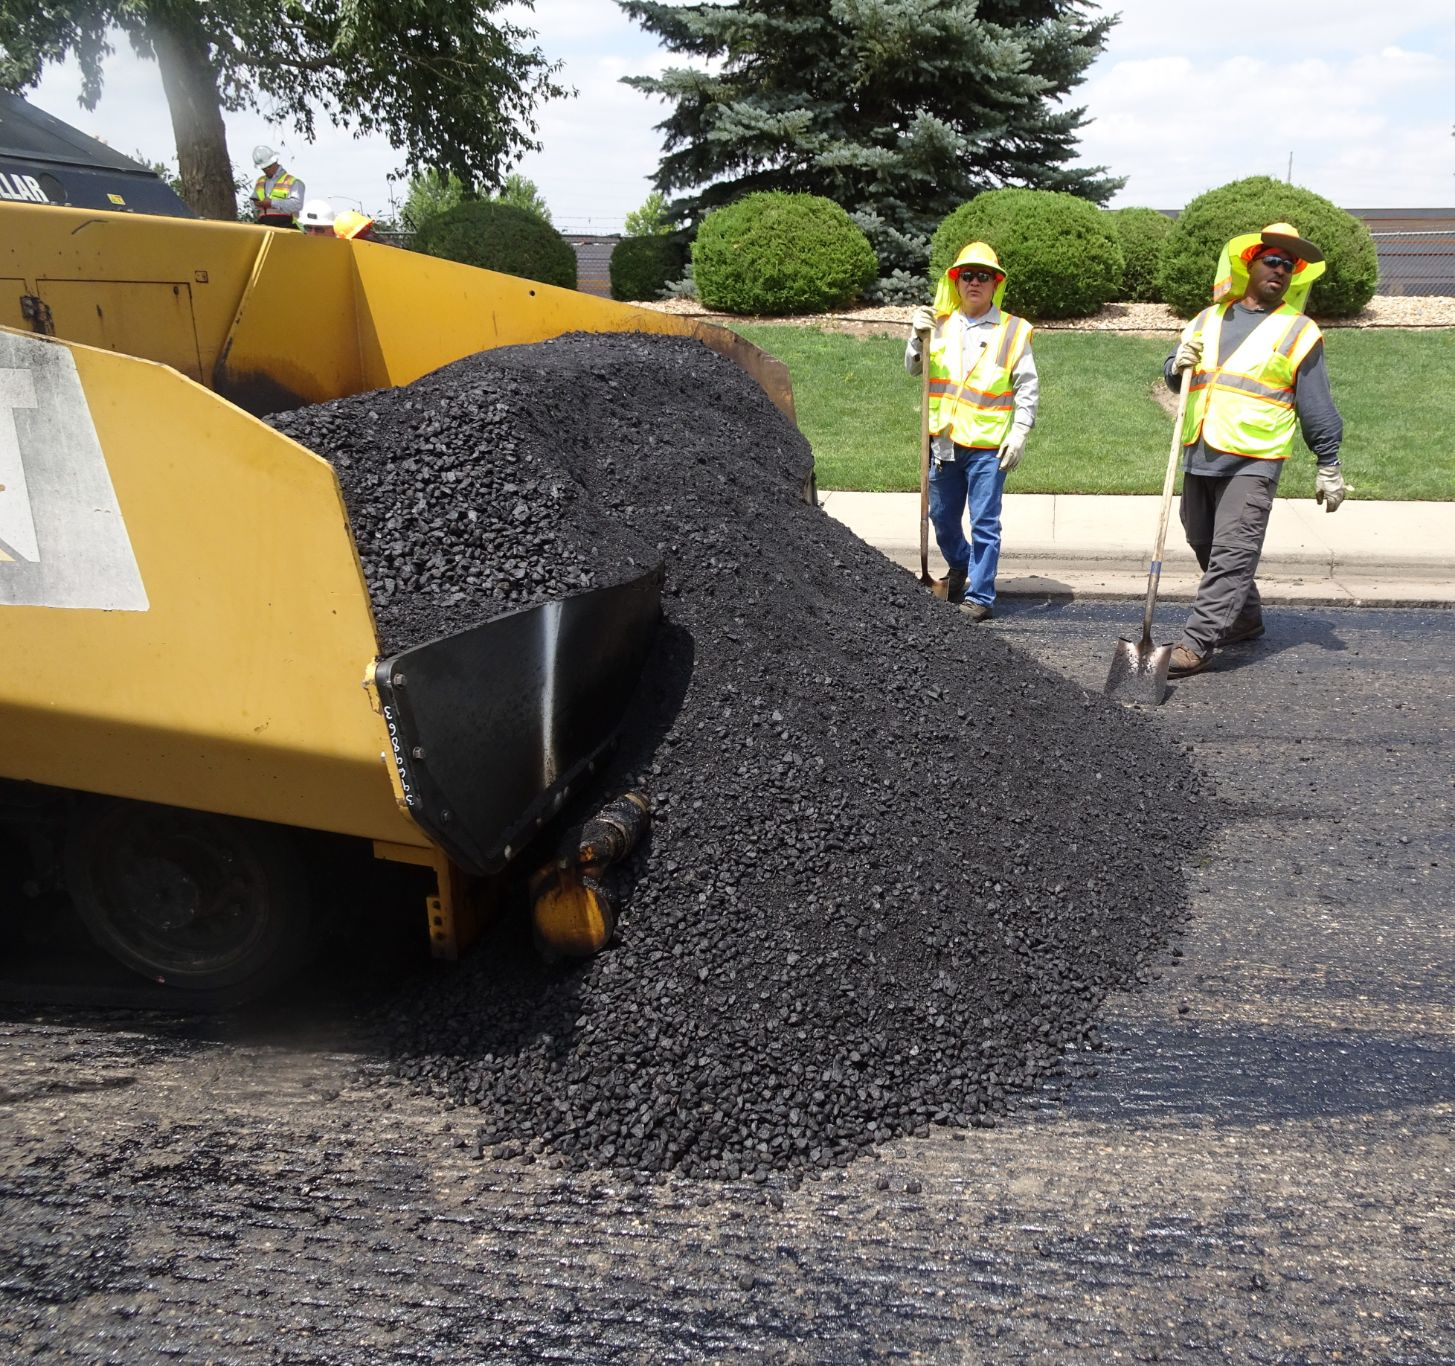 A photo of a dump truck unloading asphalt material for a paving project